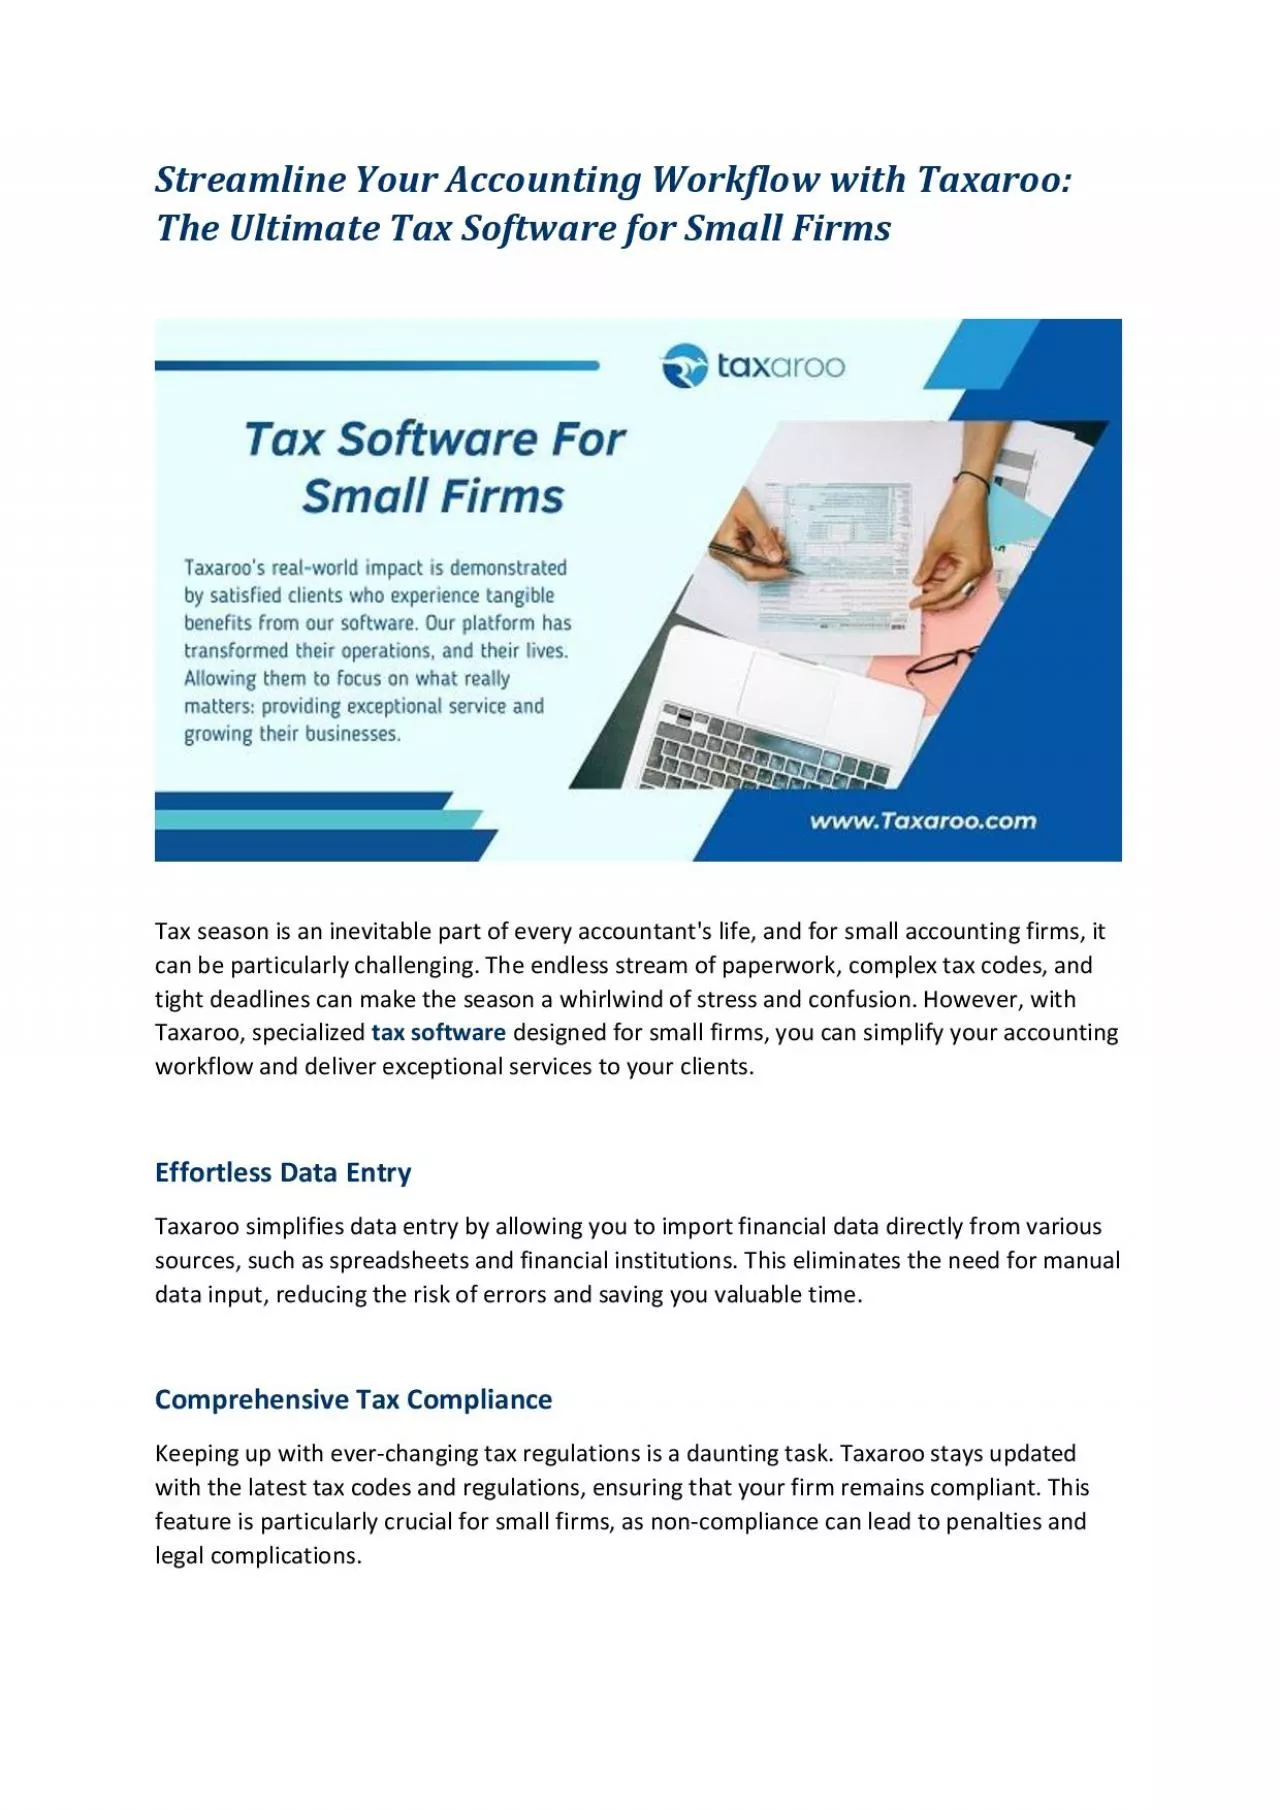 Streamline Your Accounting Workflow with Taxaroo: The Ultimate Tax Software for Small